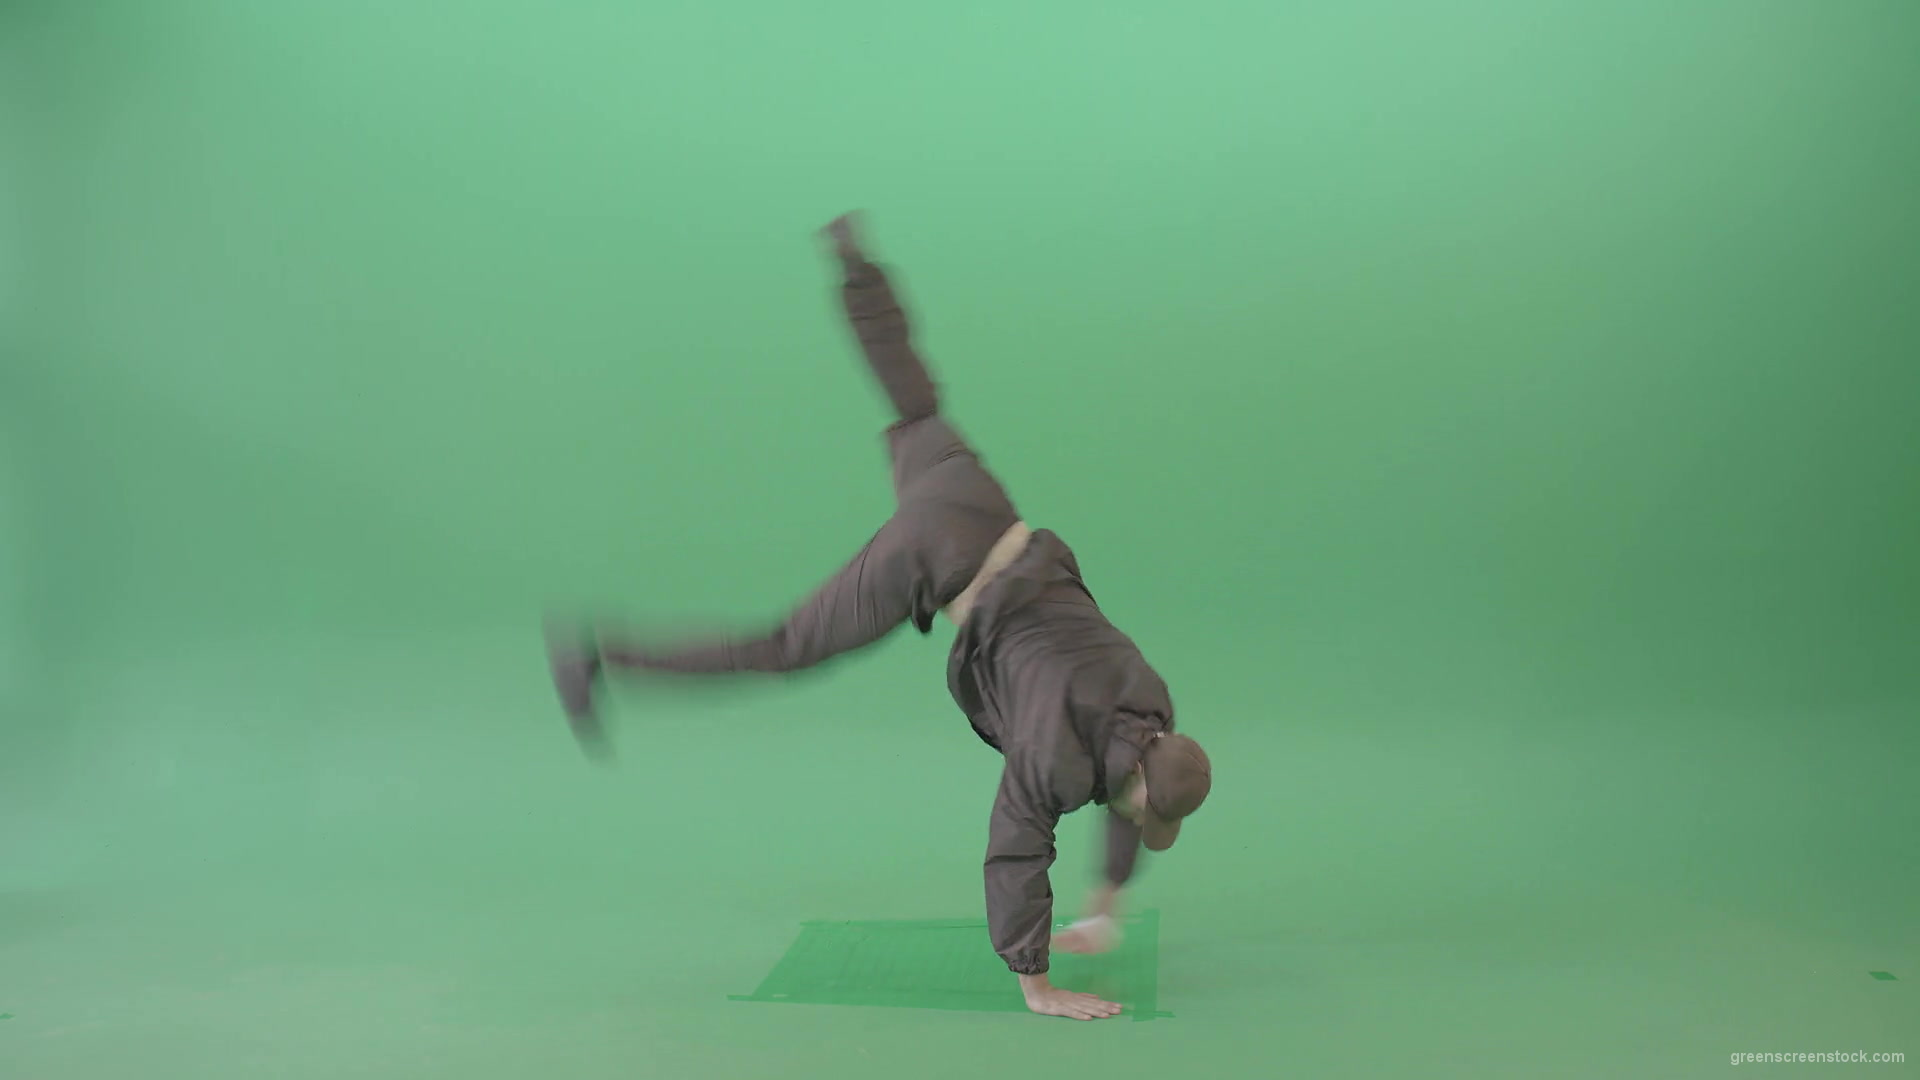 Breakadance-Man-making-dynamic-power-move-element-spinning-on-hand-over-green-screen-4K-Video-Footage-1920_004 Green Screen Stock